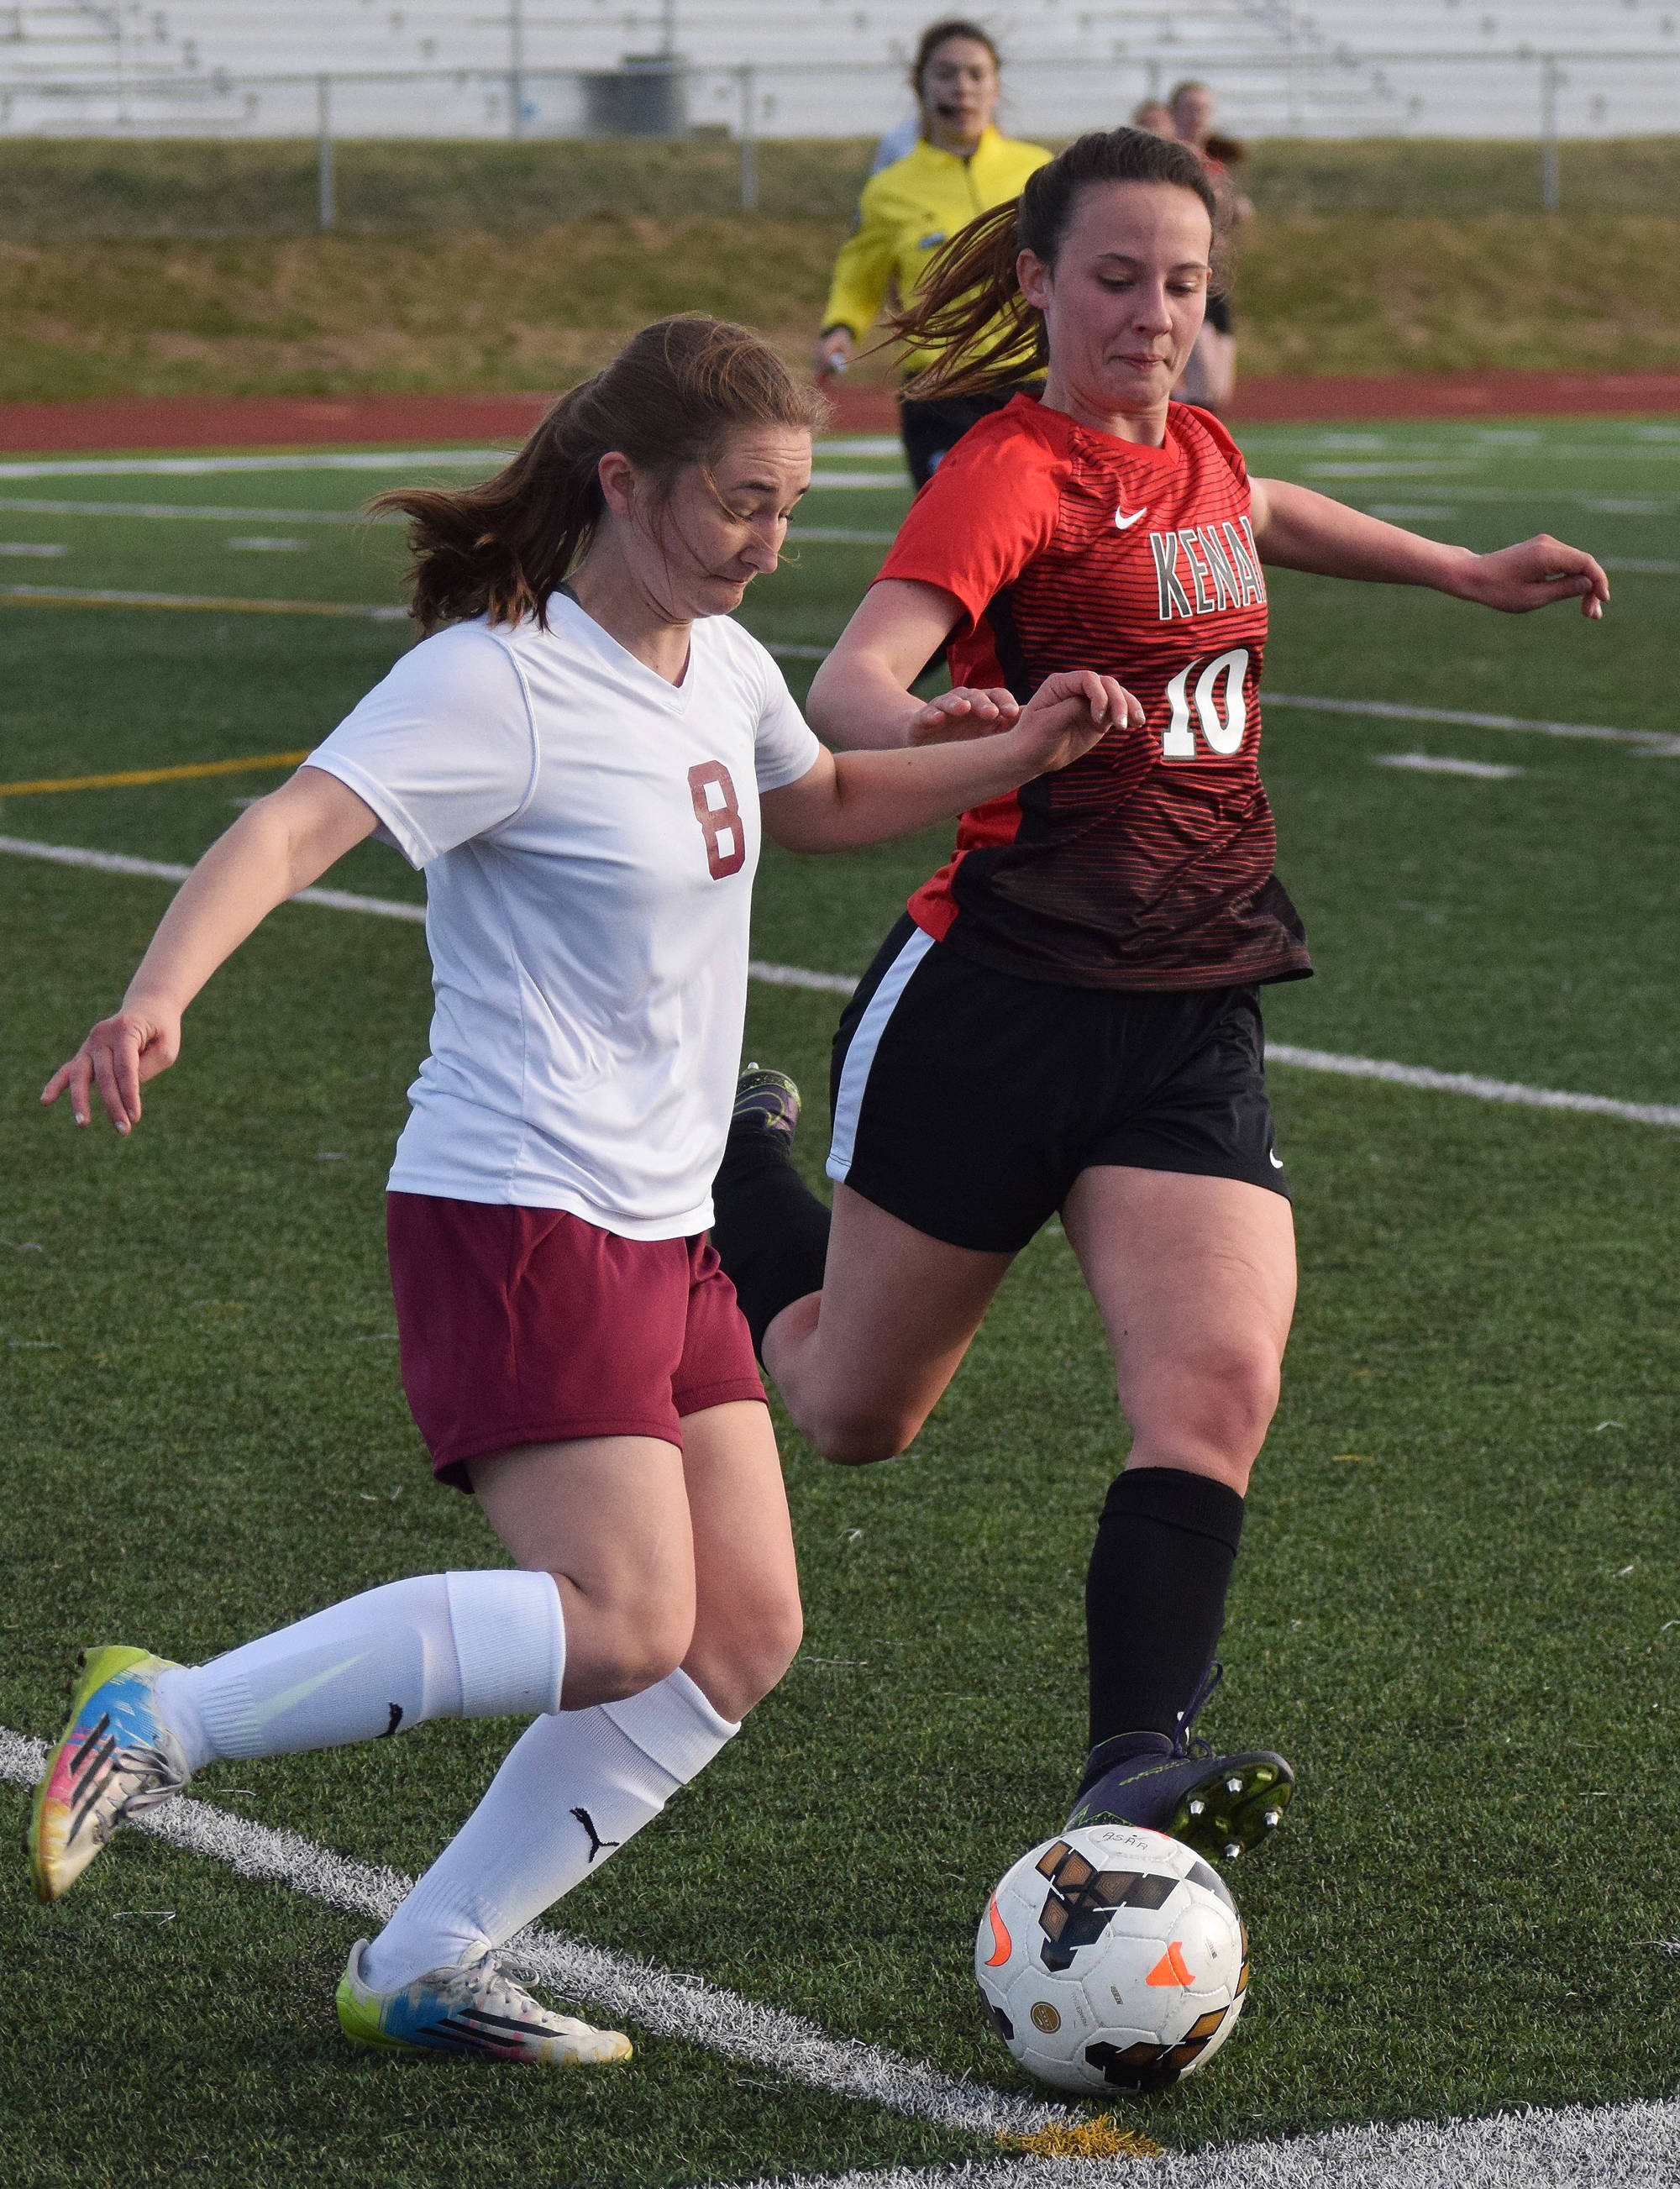 Kenai’s Savaya Bieber (10) battles for the ball against Anna Christiansen of Grace Thursday in the Division II state soccer tournament at Service High School. (Photo by Joey Klecka/Peninsula Clarion)